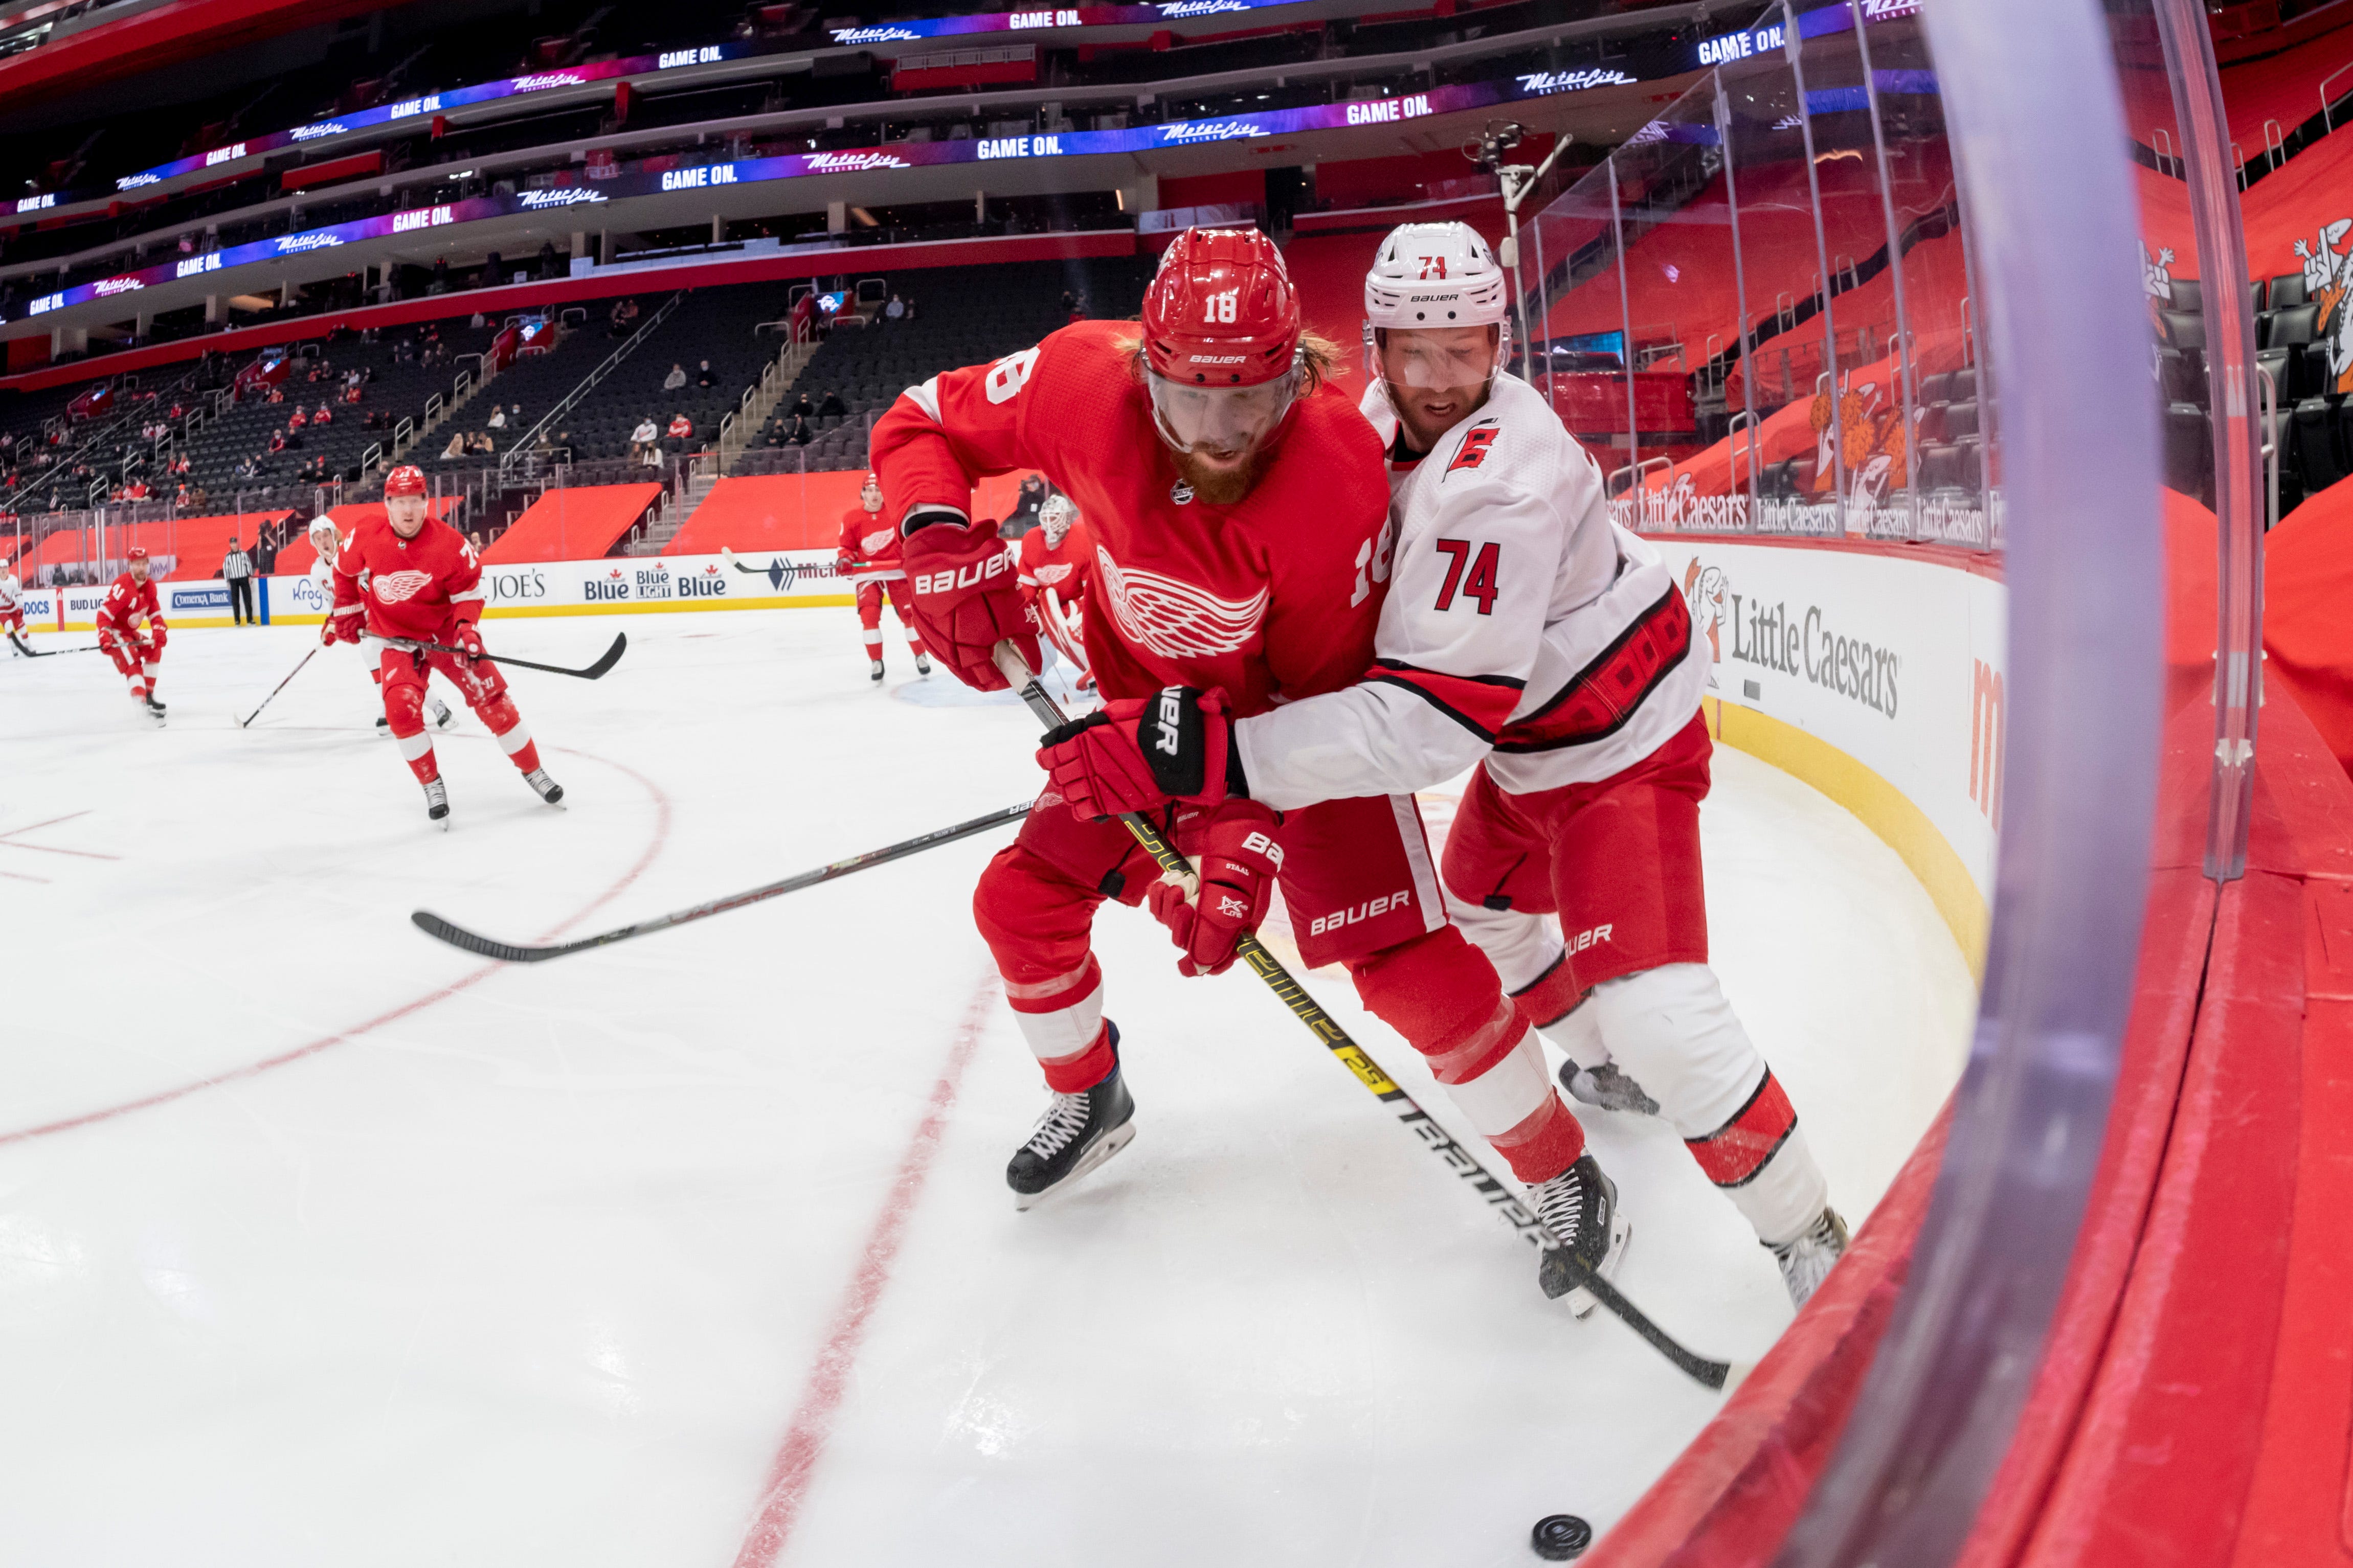 Detroit defenseman Marc Staal and Carolina defenseman Jaccob Slavin battle for the puck in the second period.